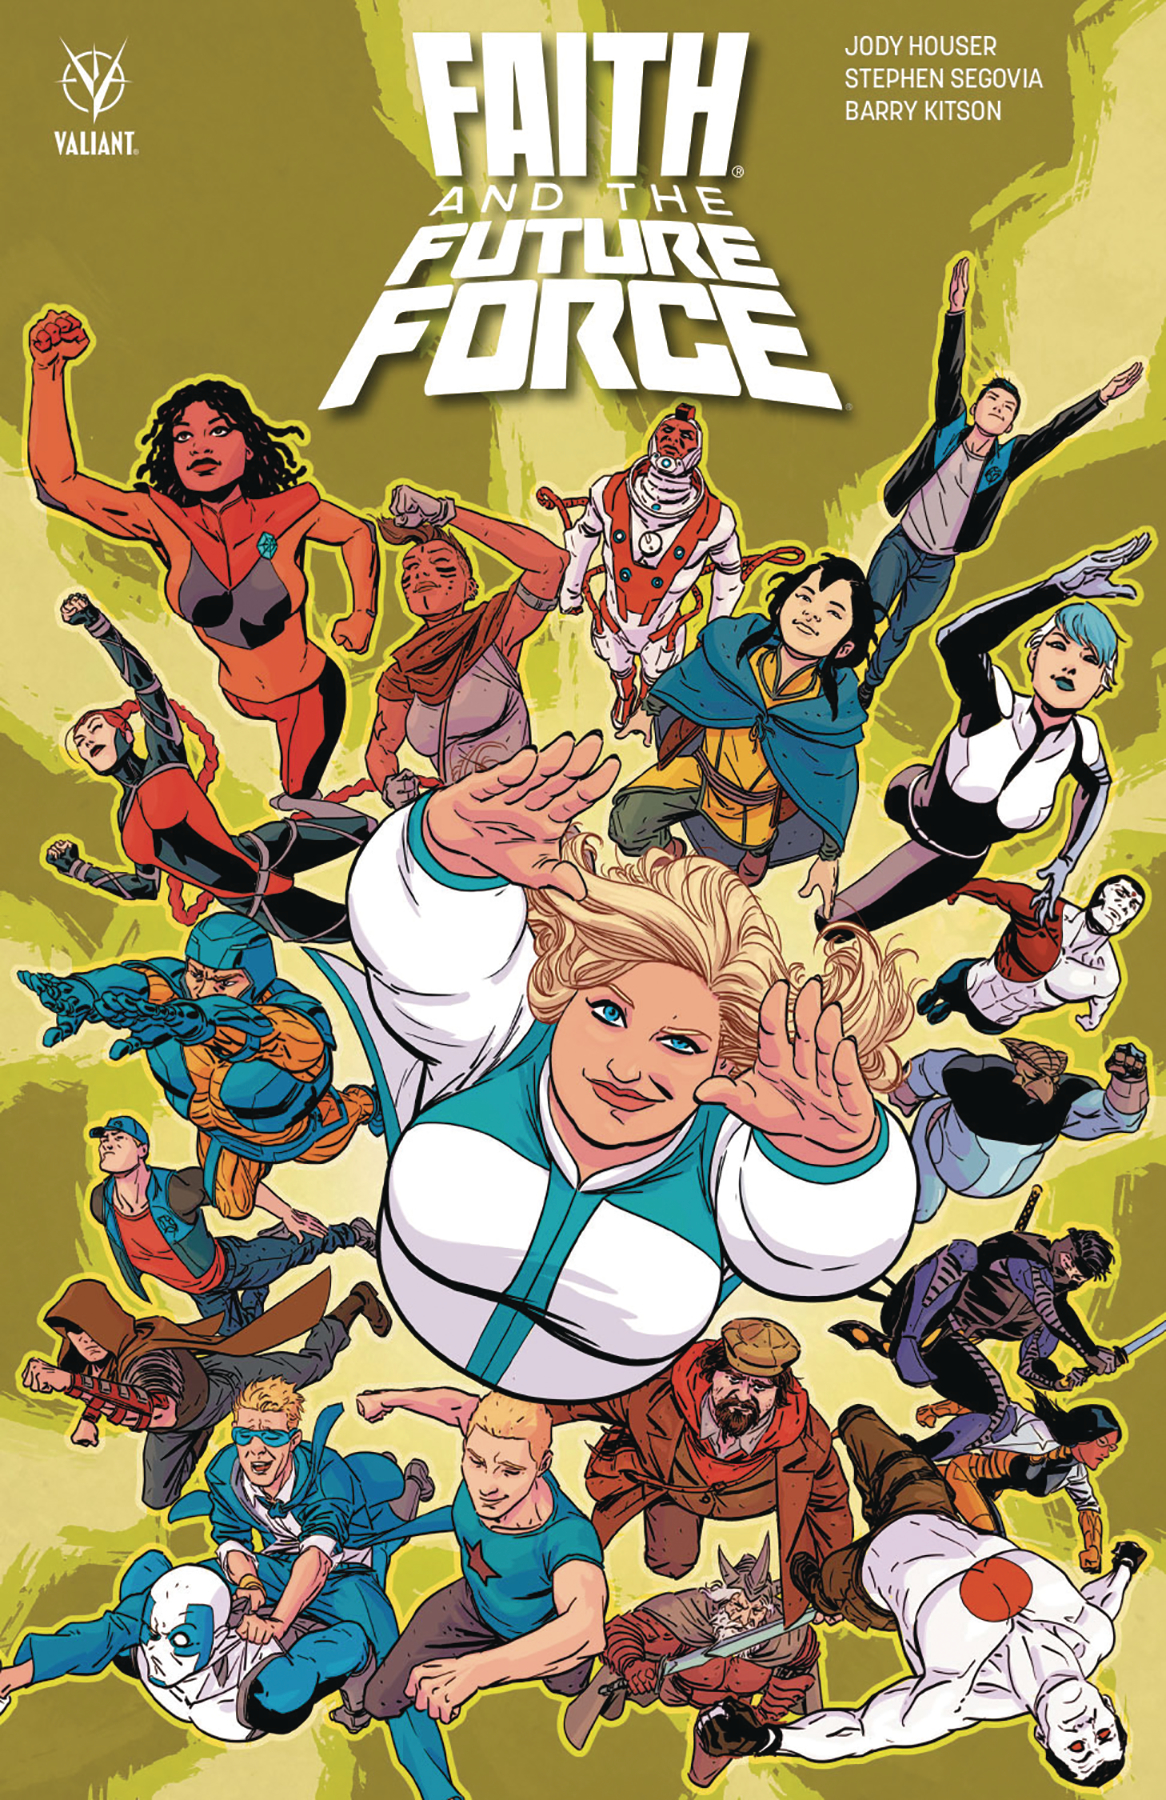 Faith and the Future Force Graphic Novel